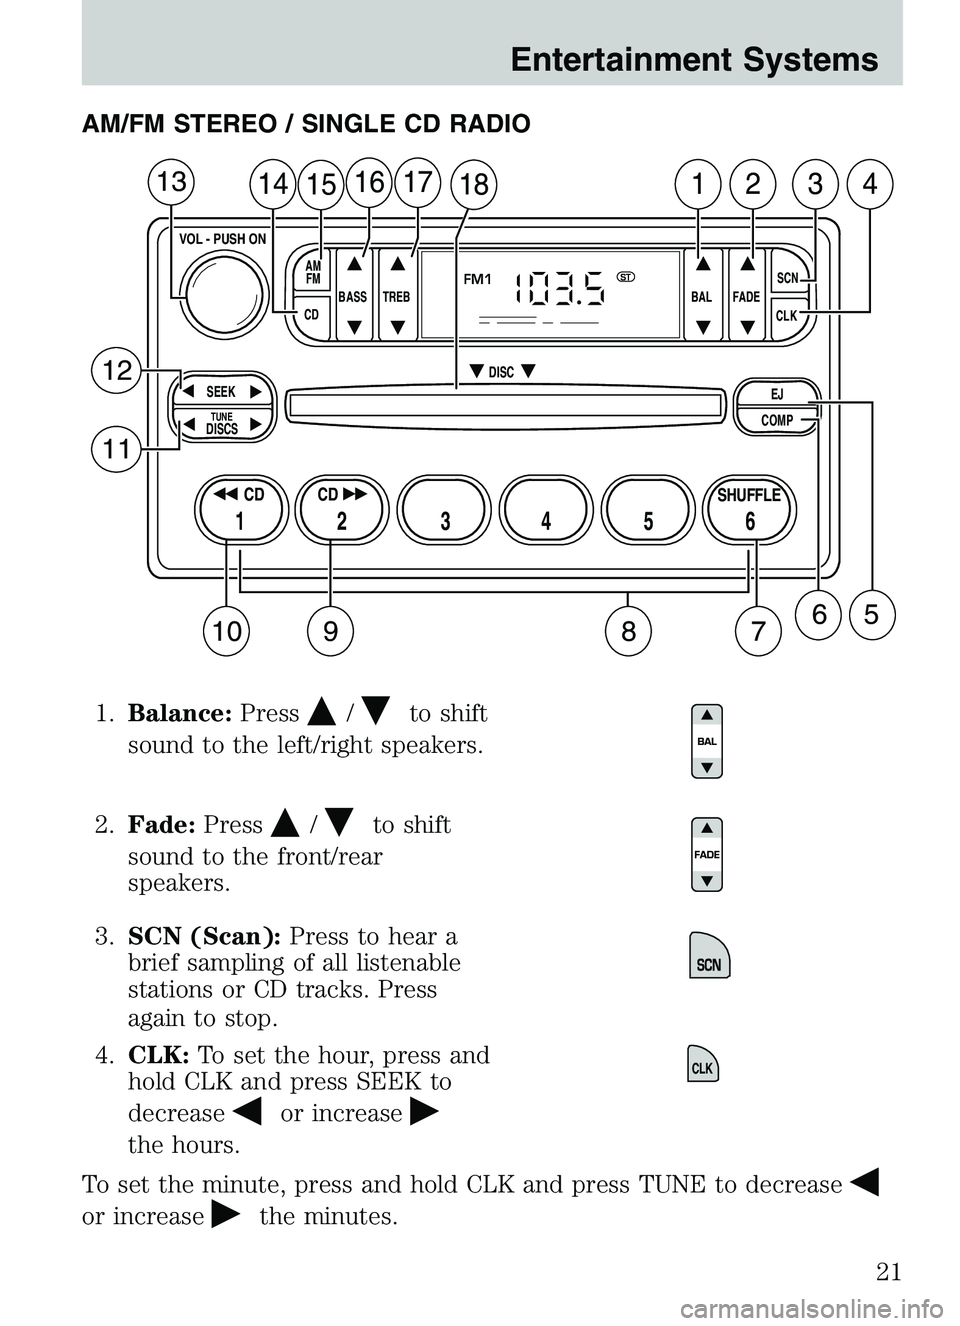 MAZDA MODEL B4000 2003  Owners Manual AM/FM STEREO / SINGLE CD RADIO1. Balance: Press
/to shift
sound to the left/right speakers.
2. Fade: Press
/to shift
sound to the front/rear
speakers.
3. SCN (Scan): Press to hear a
brief sampling of 